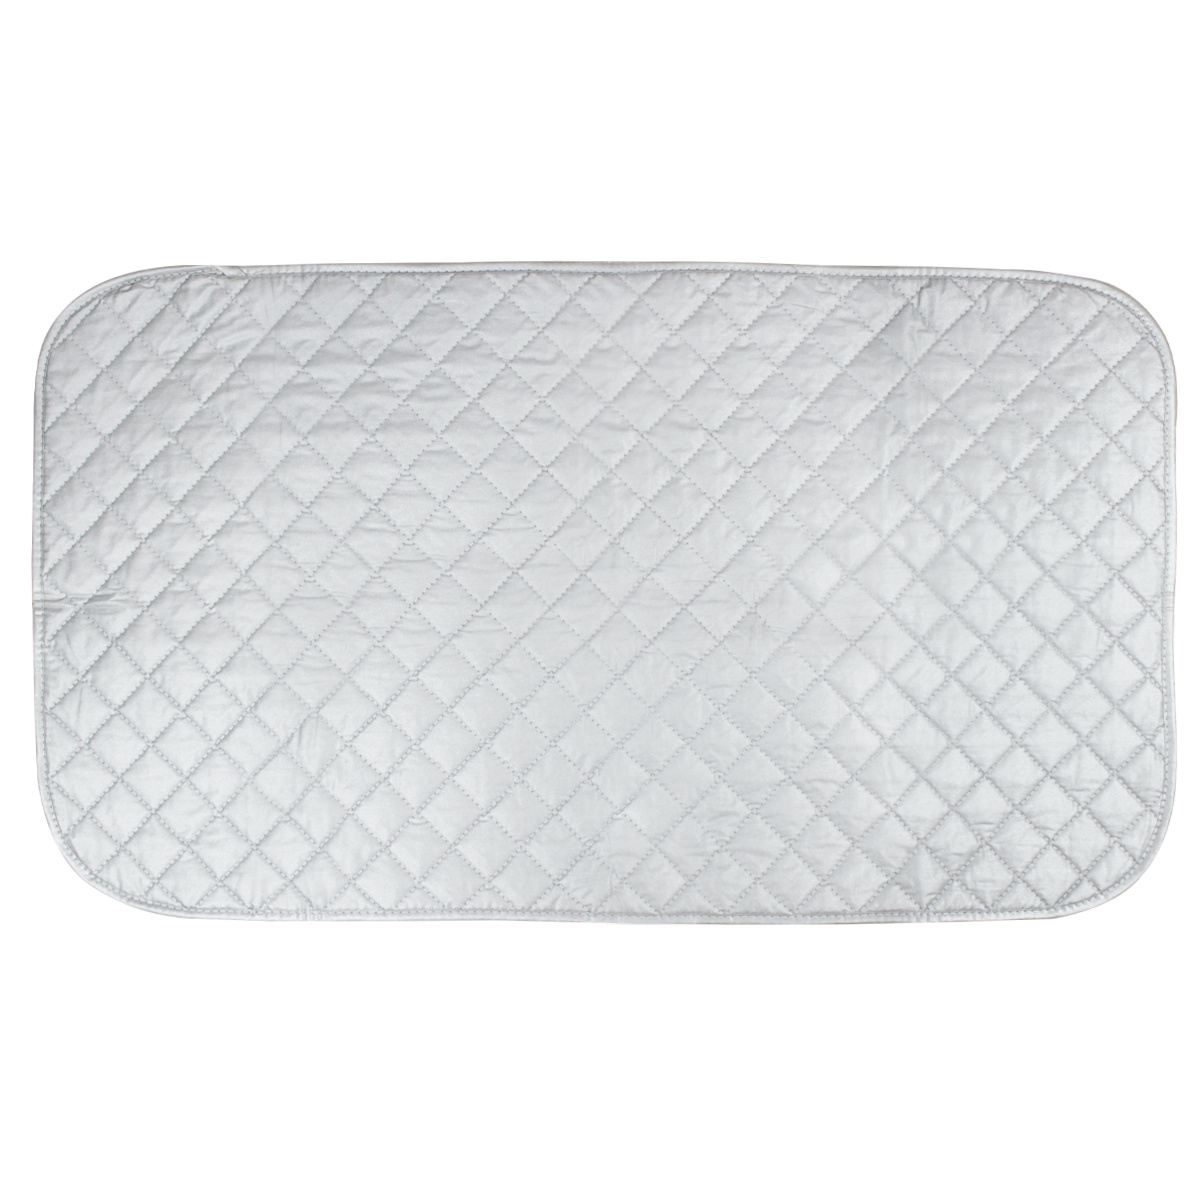 Portable Foldable Ironing Pad Mat Blanket for Table Travel Ironing Board